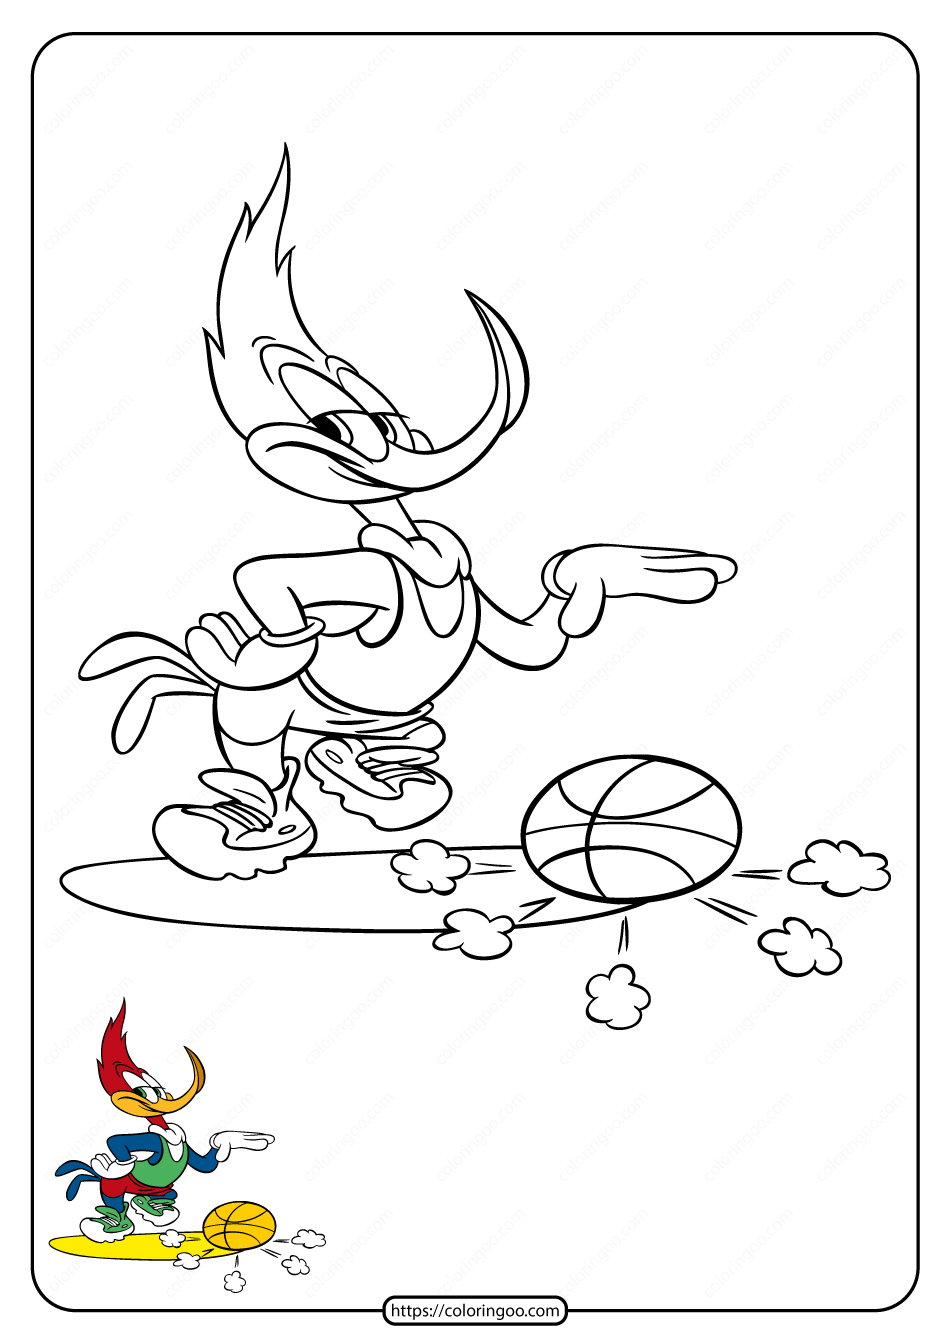 Free Printable Woody Woodpecker Coloring Pages 22